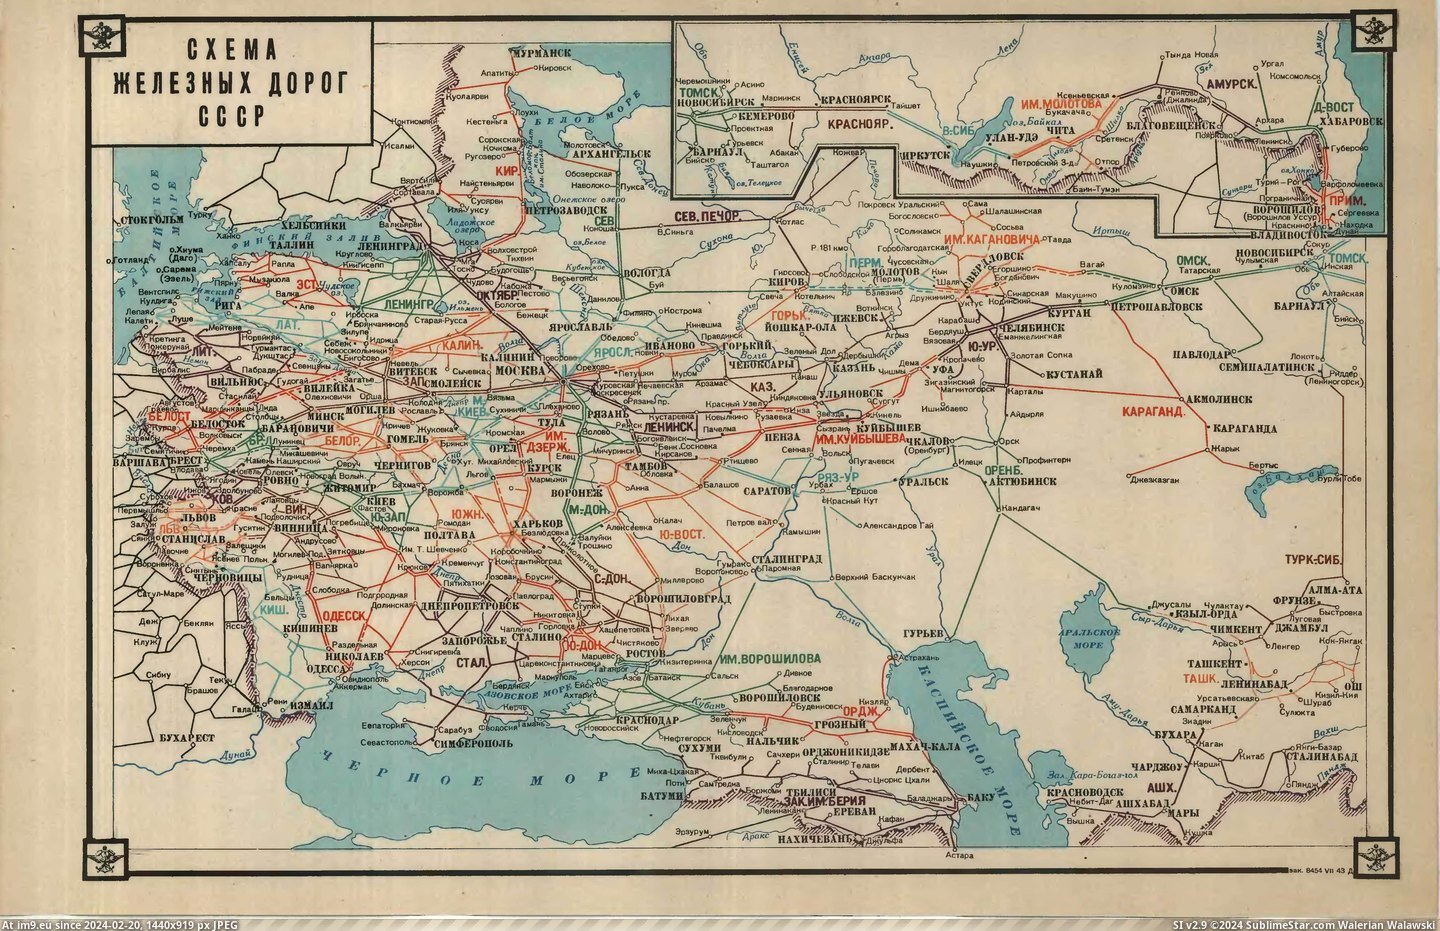 #Album #Military #Atlas #Railroad #Network [Mapporn] military atlas of the USSR railroad and waterway network in 1943 (album in comments) [5269x3375] Pic. (Image of album My r/MAPS favs))